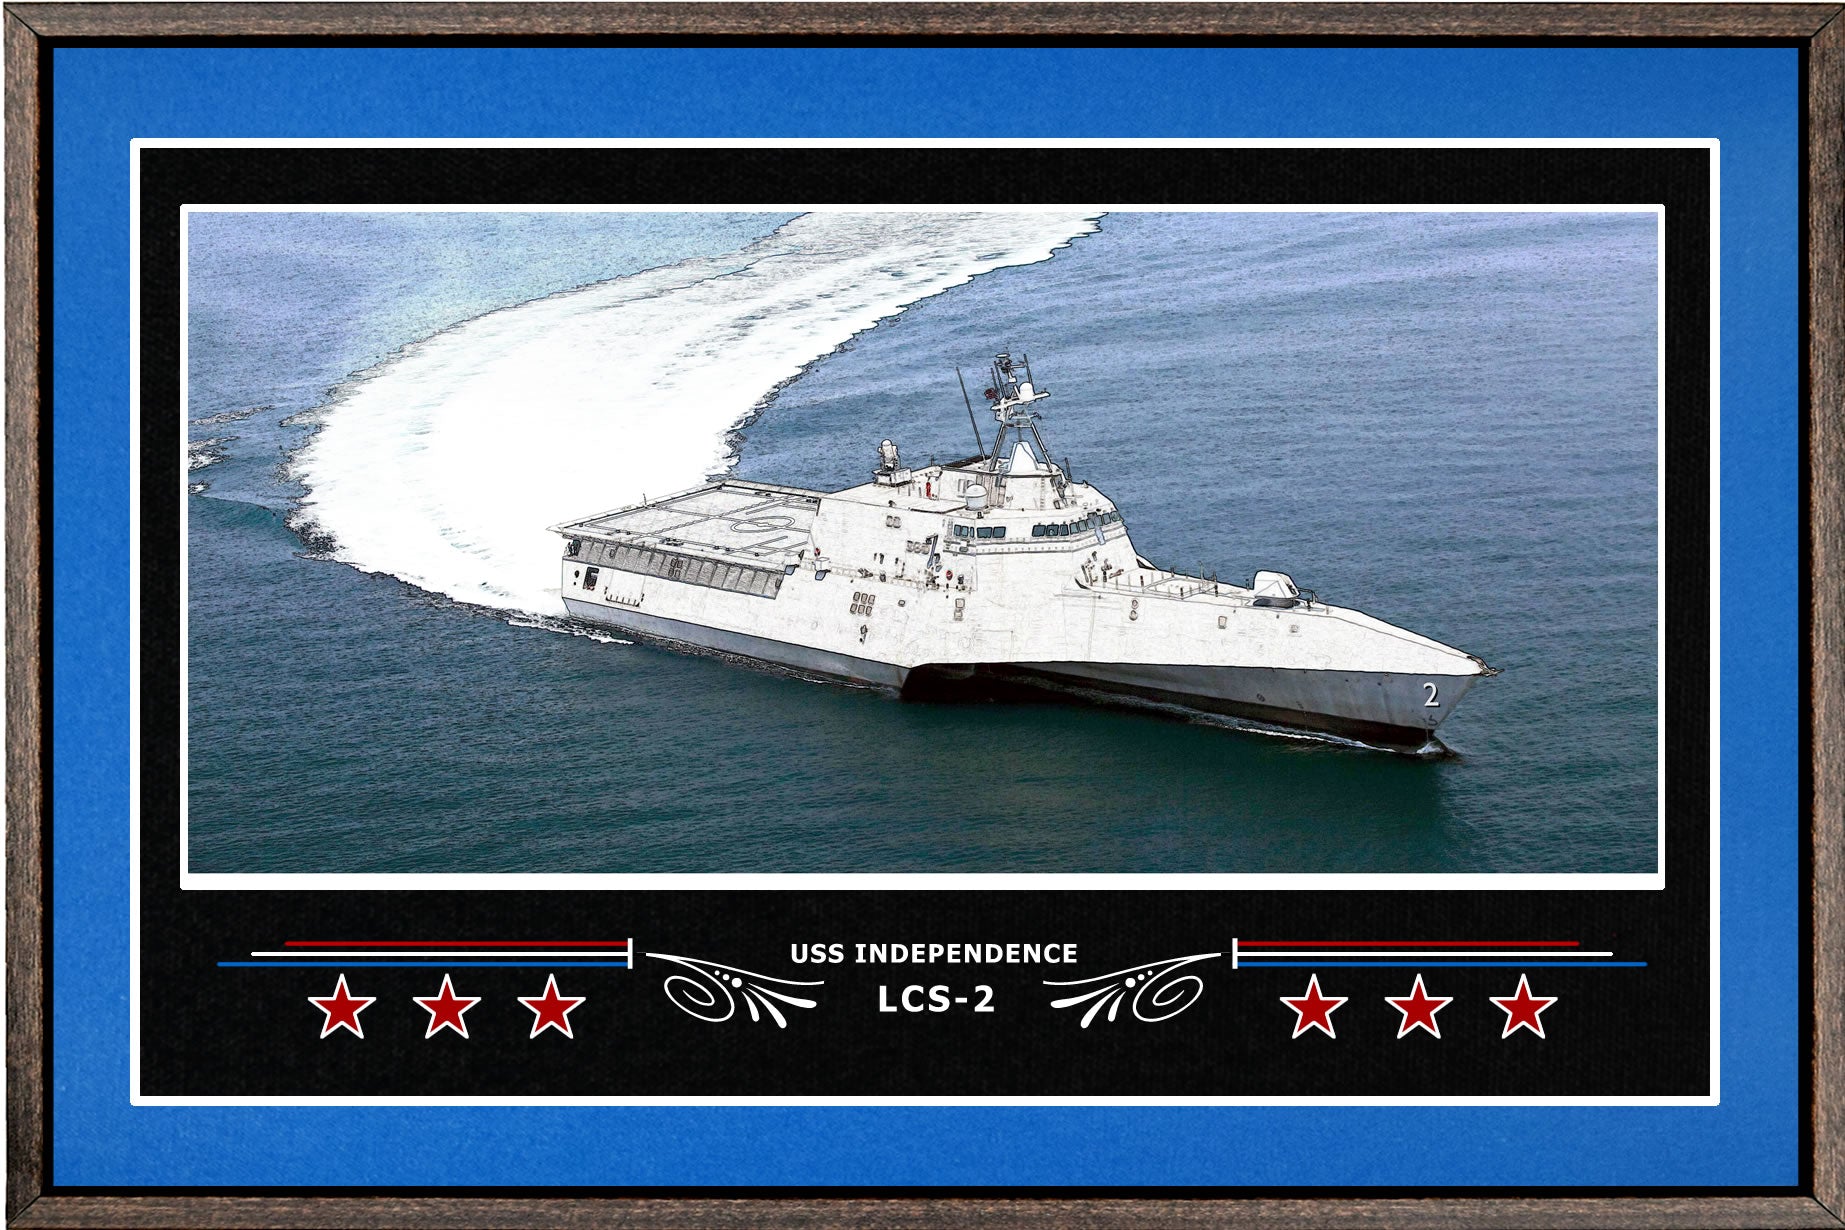 USS INDEPENDENCE LCS 2 BOX FRAMED CANVAS ART BLUE